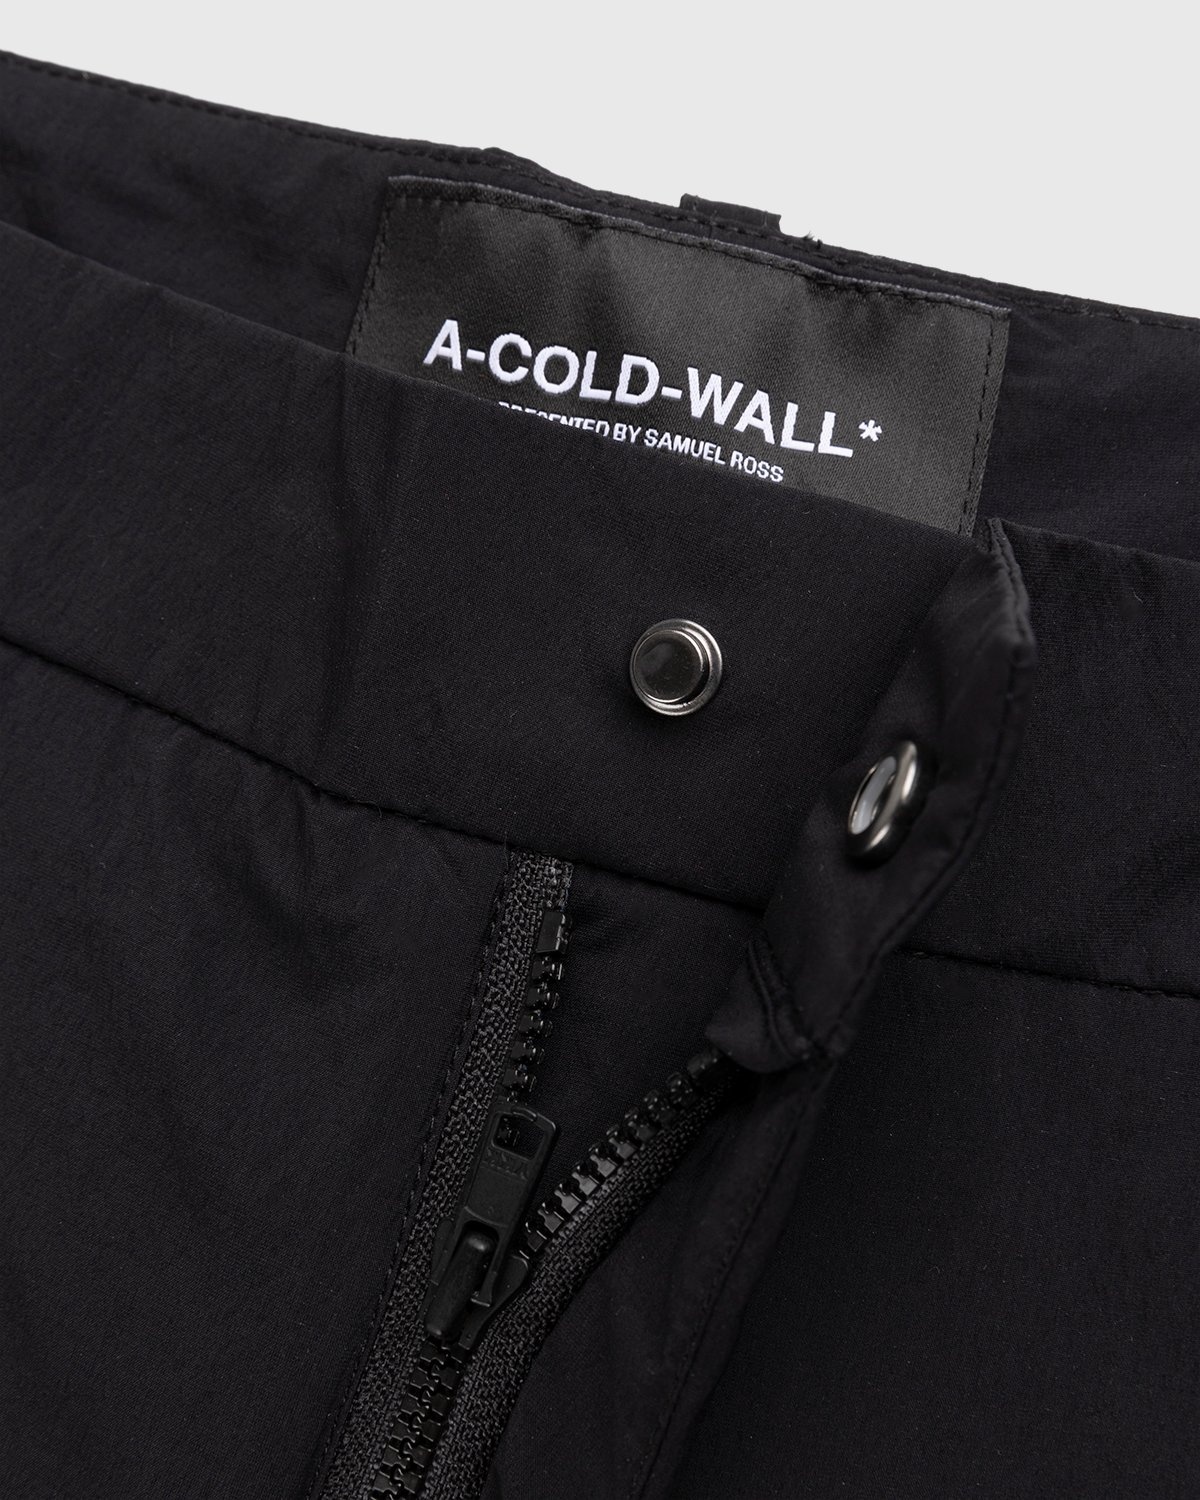 A-Cold-Wall* – Stealth Nylon Pant Black - Trousers - Black - Image 5